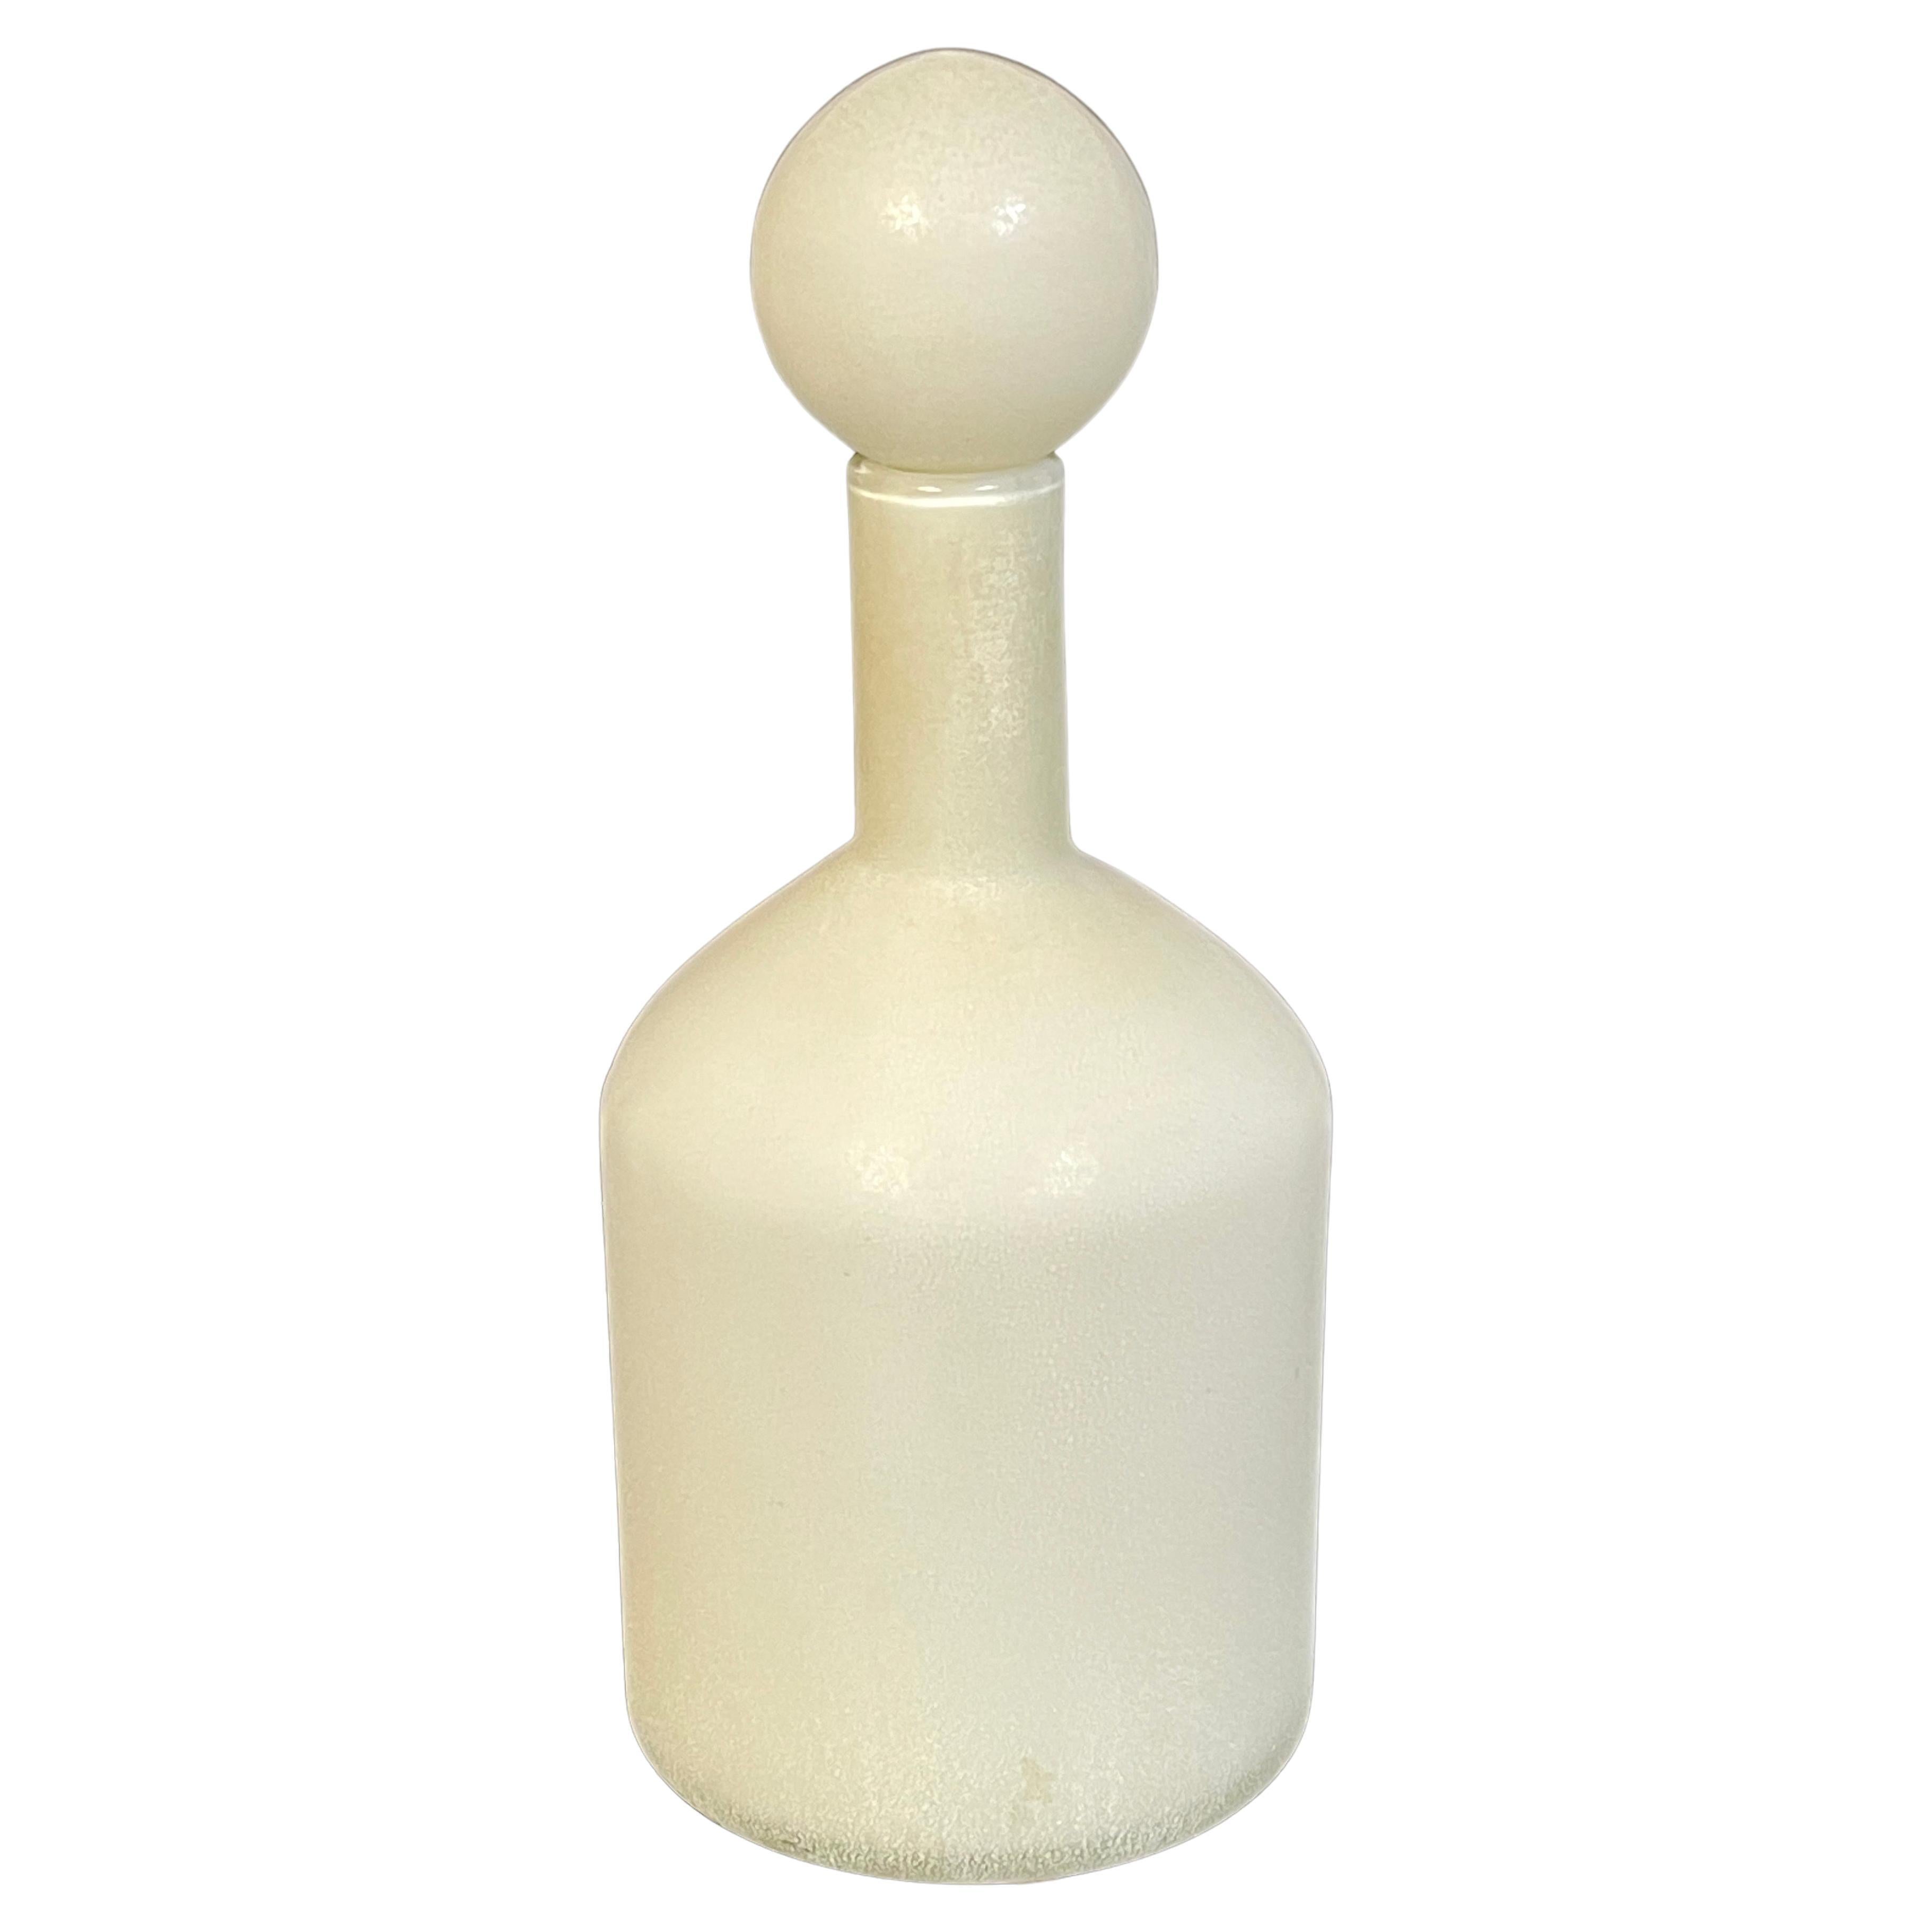 Cenedese Murano White-Scavo Decanter Bottle with Ball Stopper